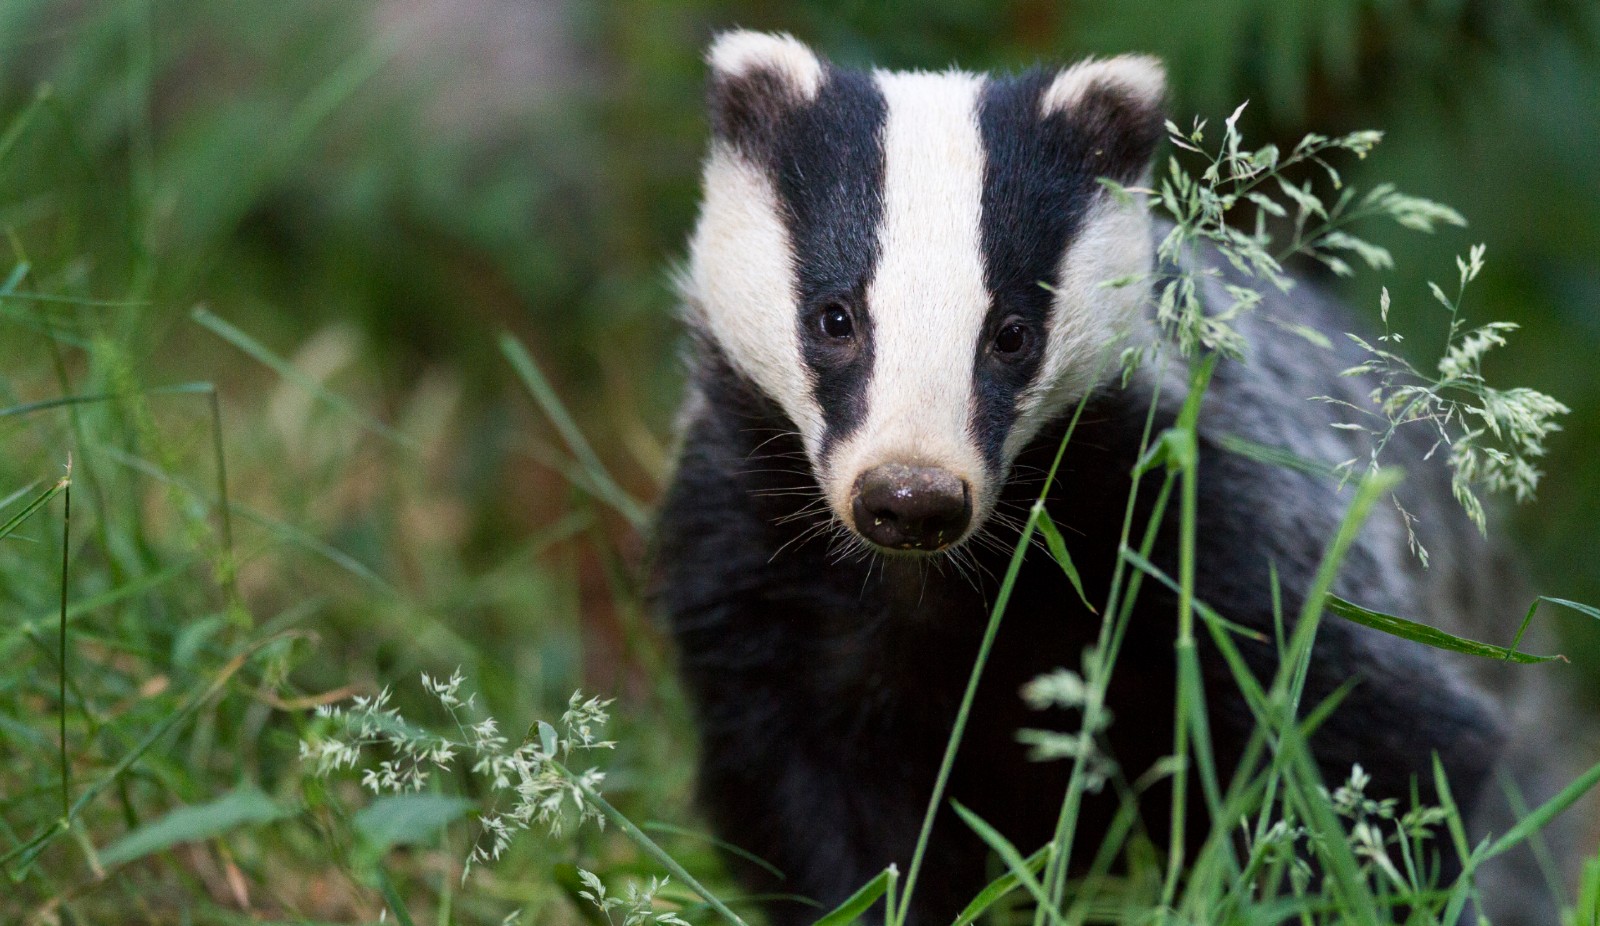 Close up of a badger standing on the grass